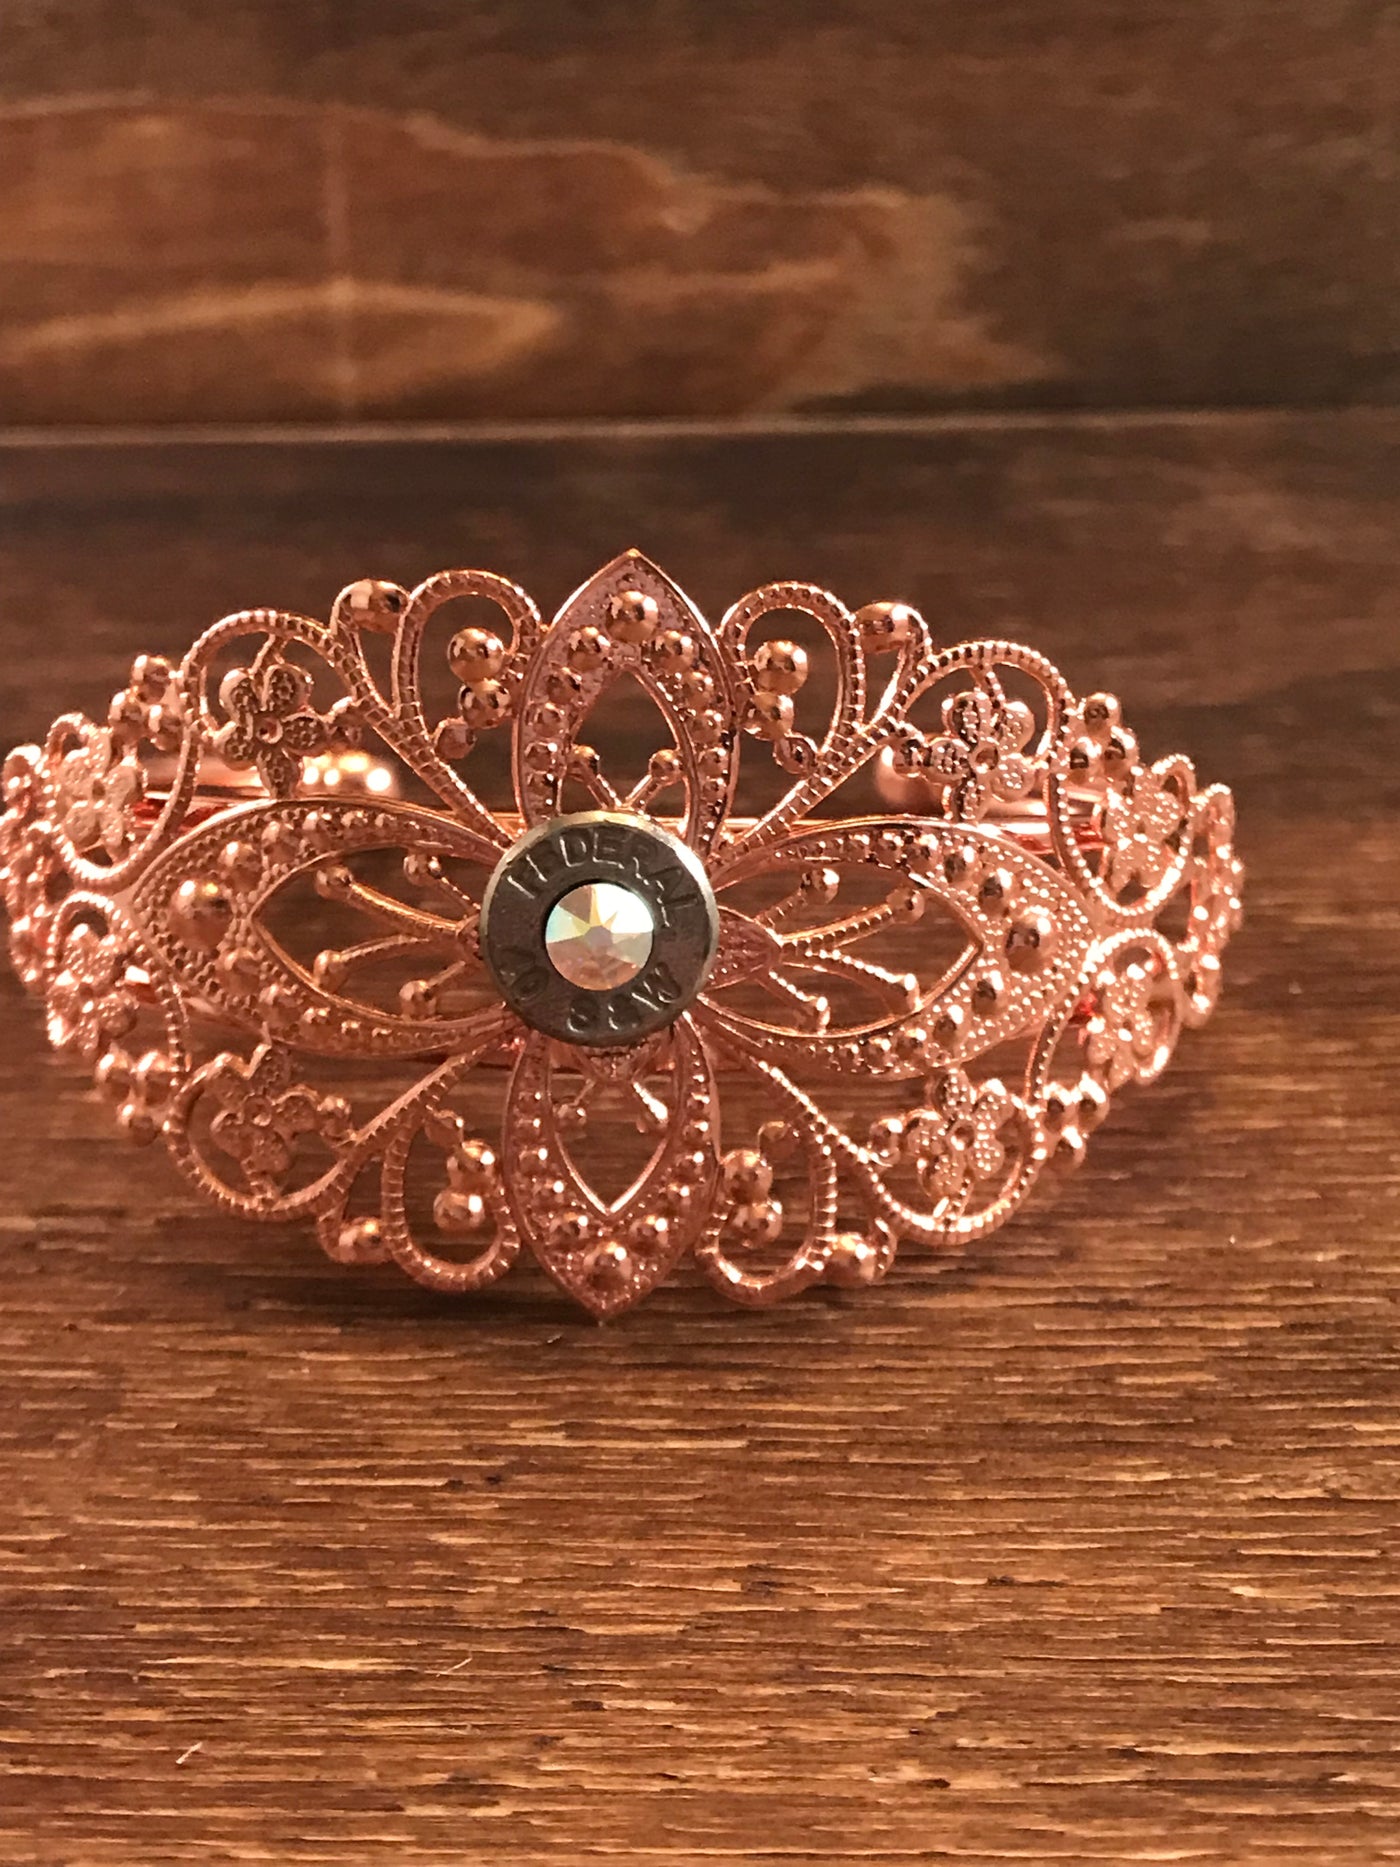 Rose Gold Cuff with 40 Caliber Bullet - Jill's Jewels | Unique, Handcrafted, Trendy, And Fun Jewelry